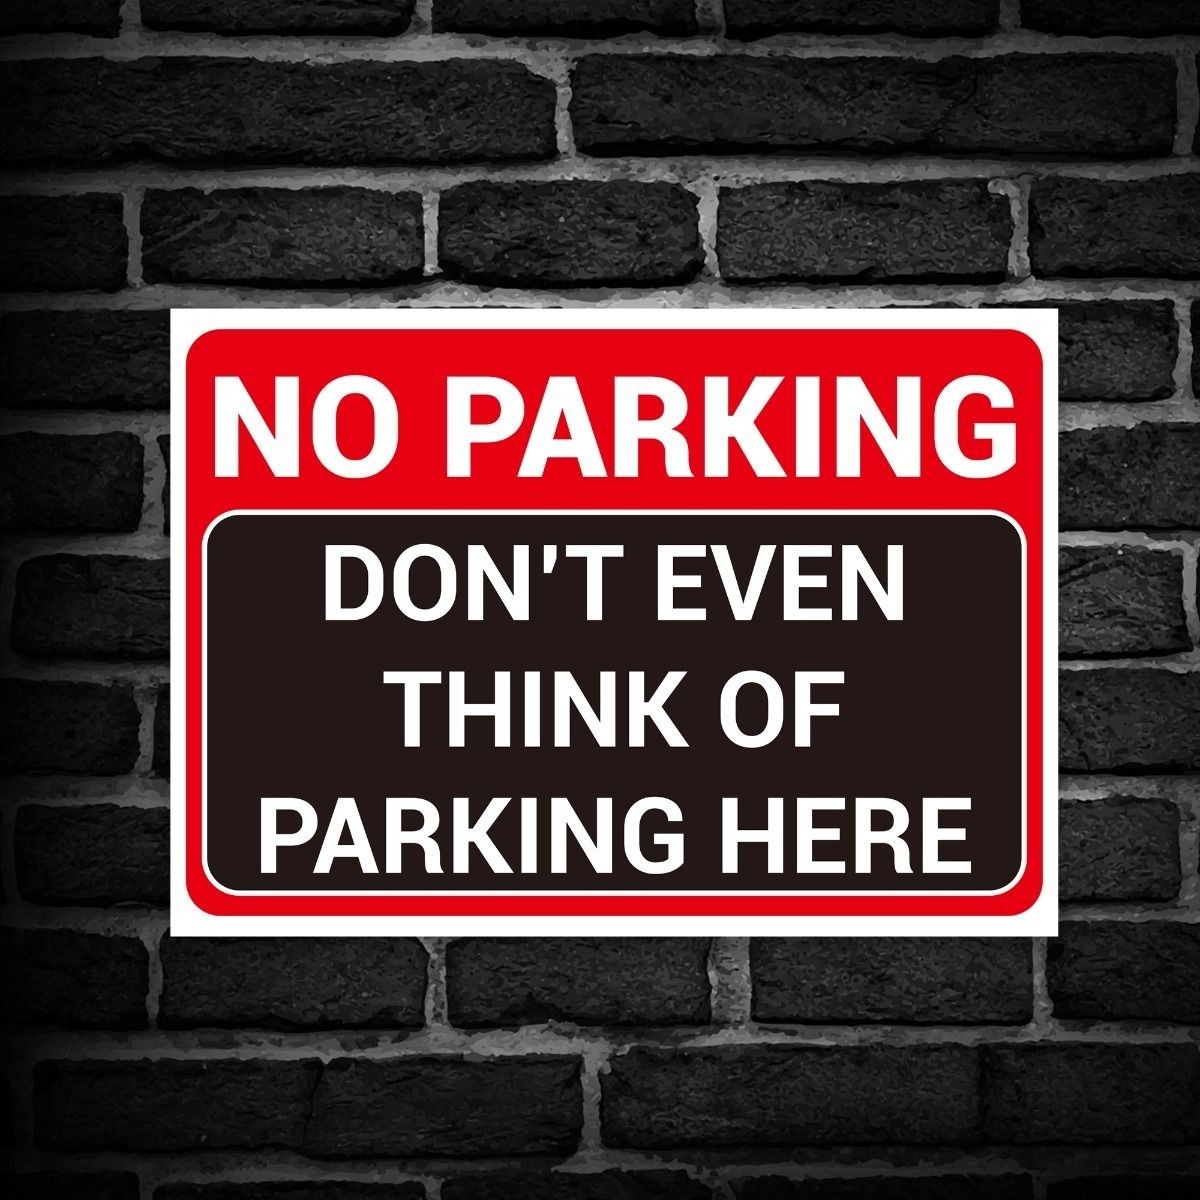 NO PARKING' And 'DON'T EVEN THINK OF PARKING HERE', Hilarious and Funny  Warning Sign. Tough,